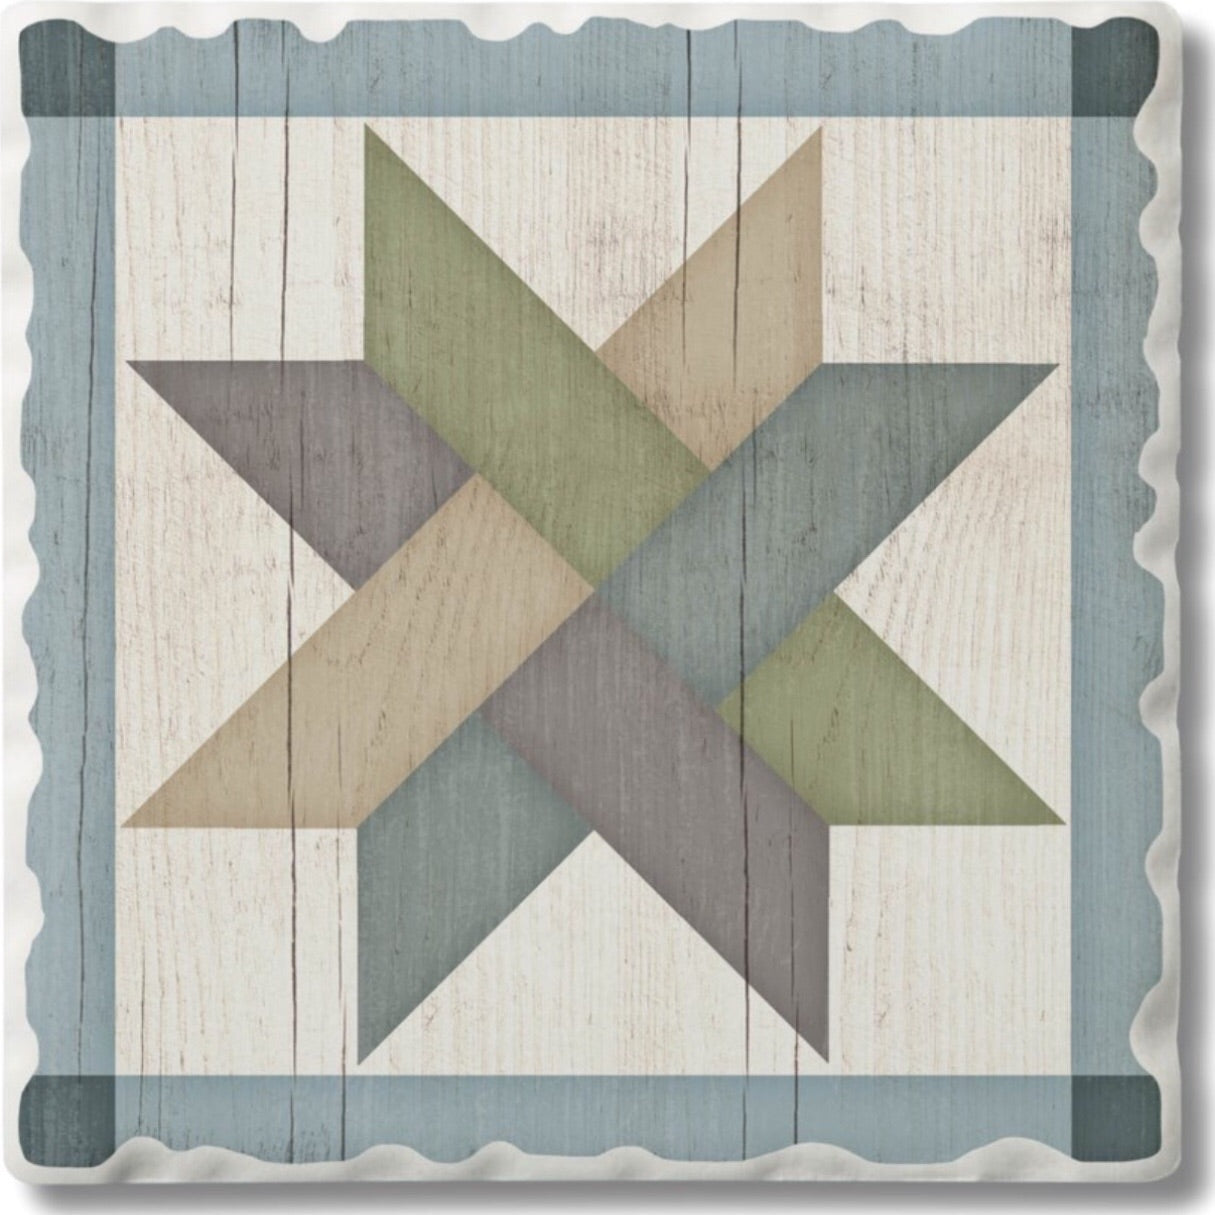 Absorbent Stone Coaster - Weave Star